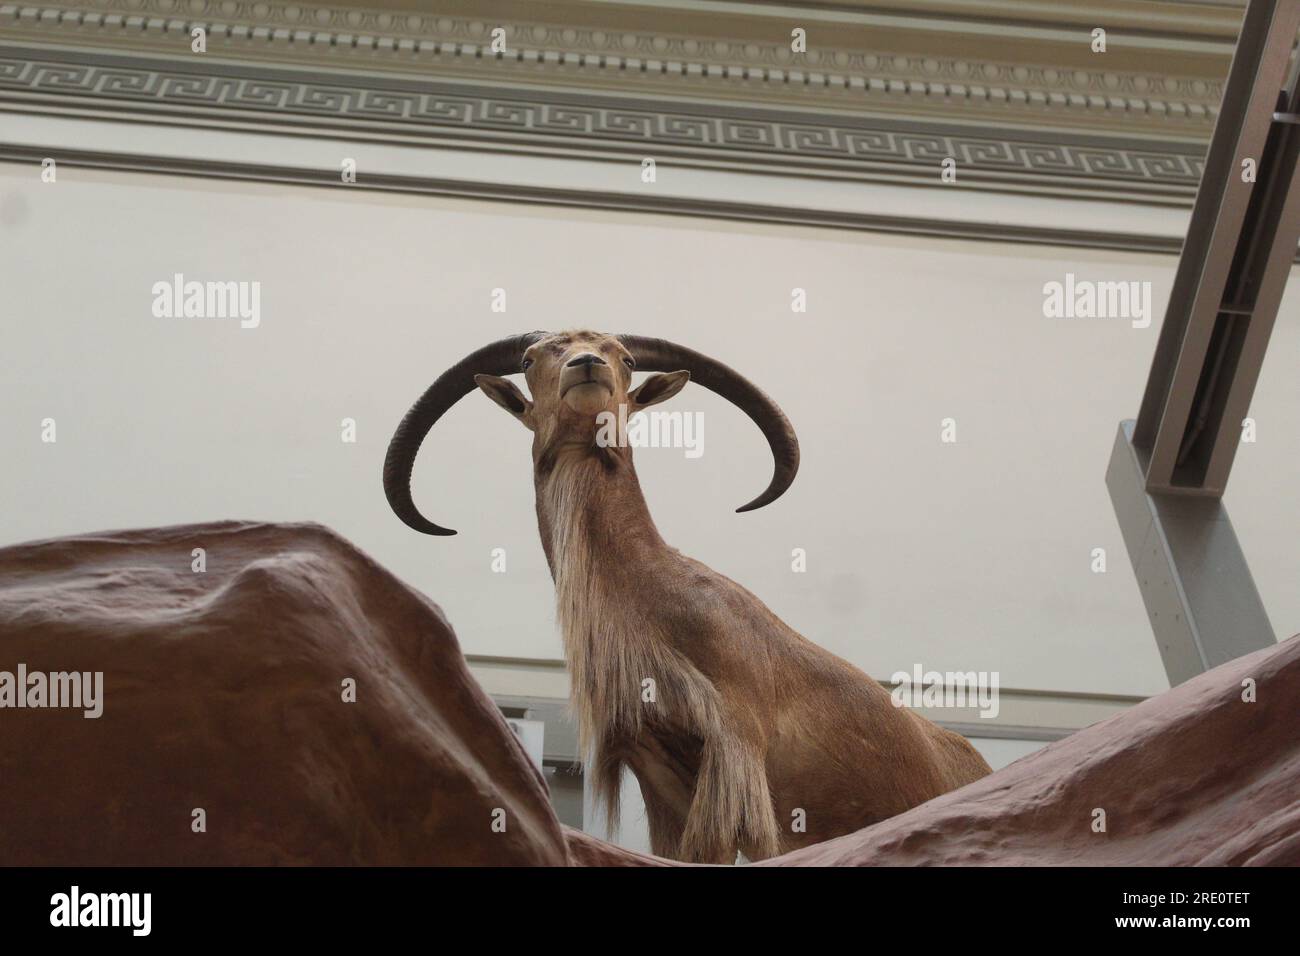 A photo of an animal in the Smithsonian National Museum of National History in Washington DC. Stock Photo